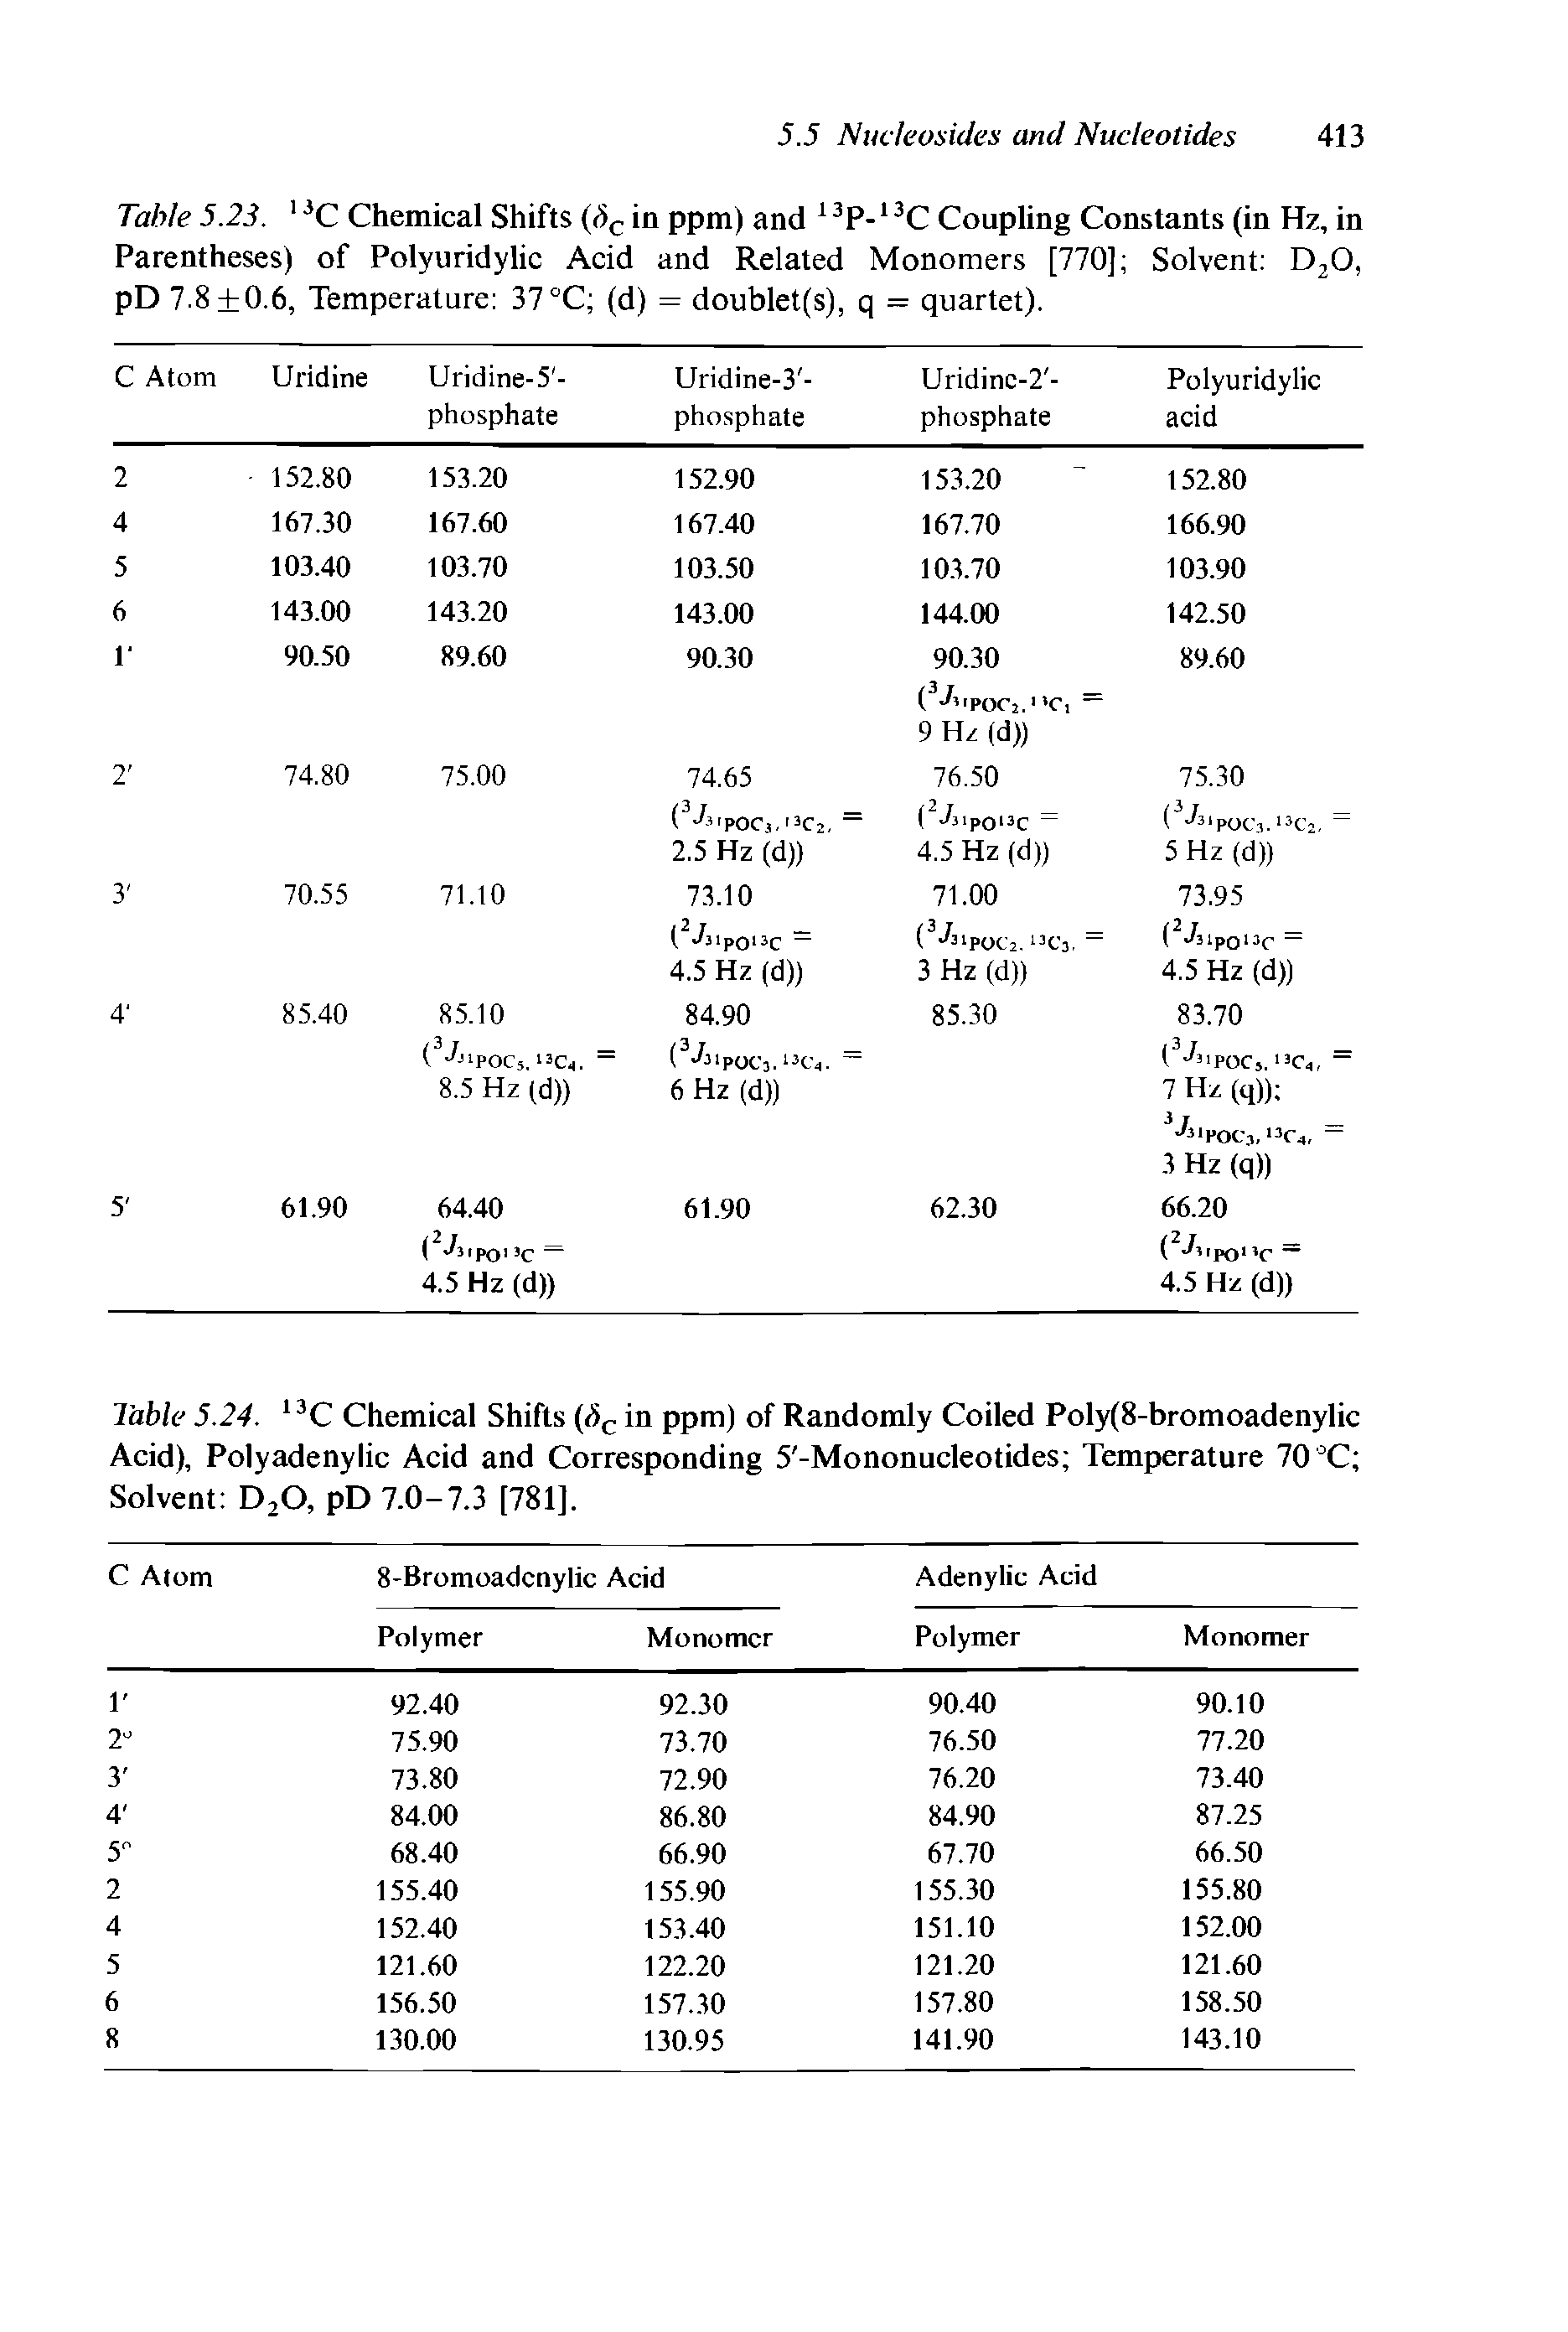 Table 5.23. 1 3C Chemical Shifts (Sc in ppm) and 13P-13C Coupling Constants (in Hz, in Parentheses) of Polyuridylic Acid and Related Monomers [770] Solvent D20, pD 7.8 0.6, Temperature 37 °C (d) = doublet(s), q = quartet).